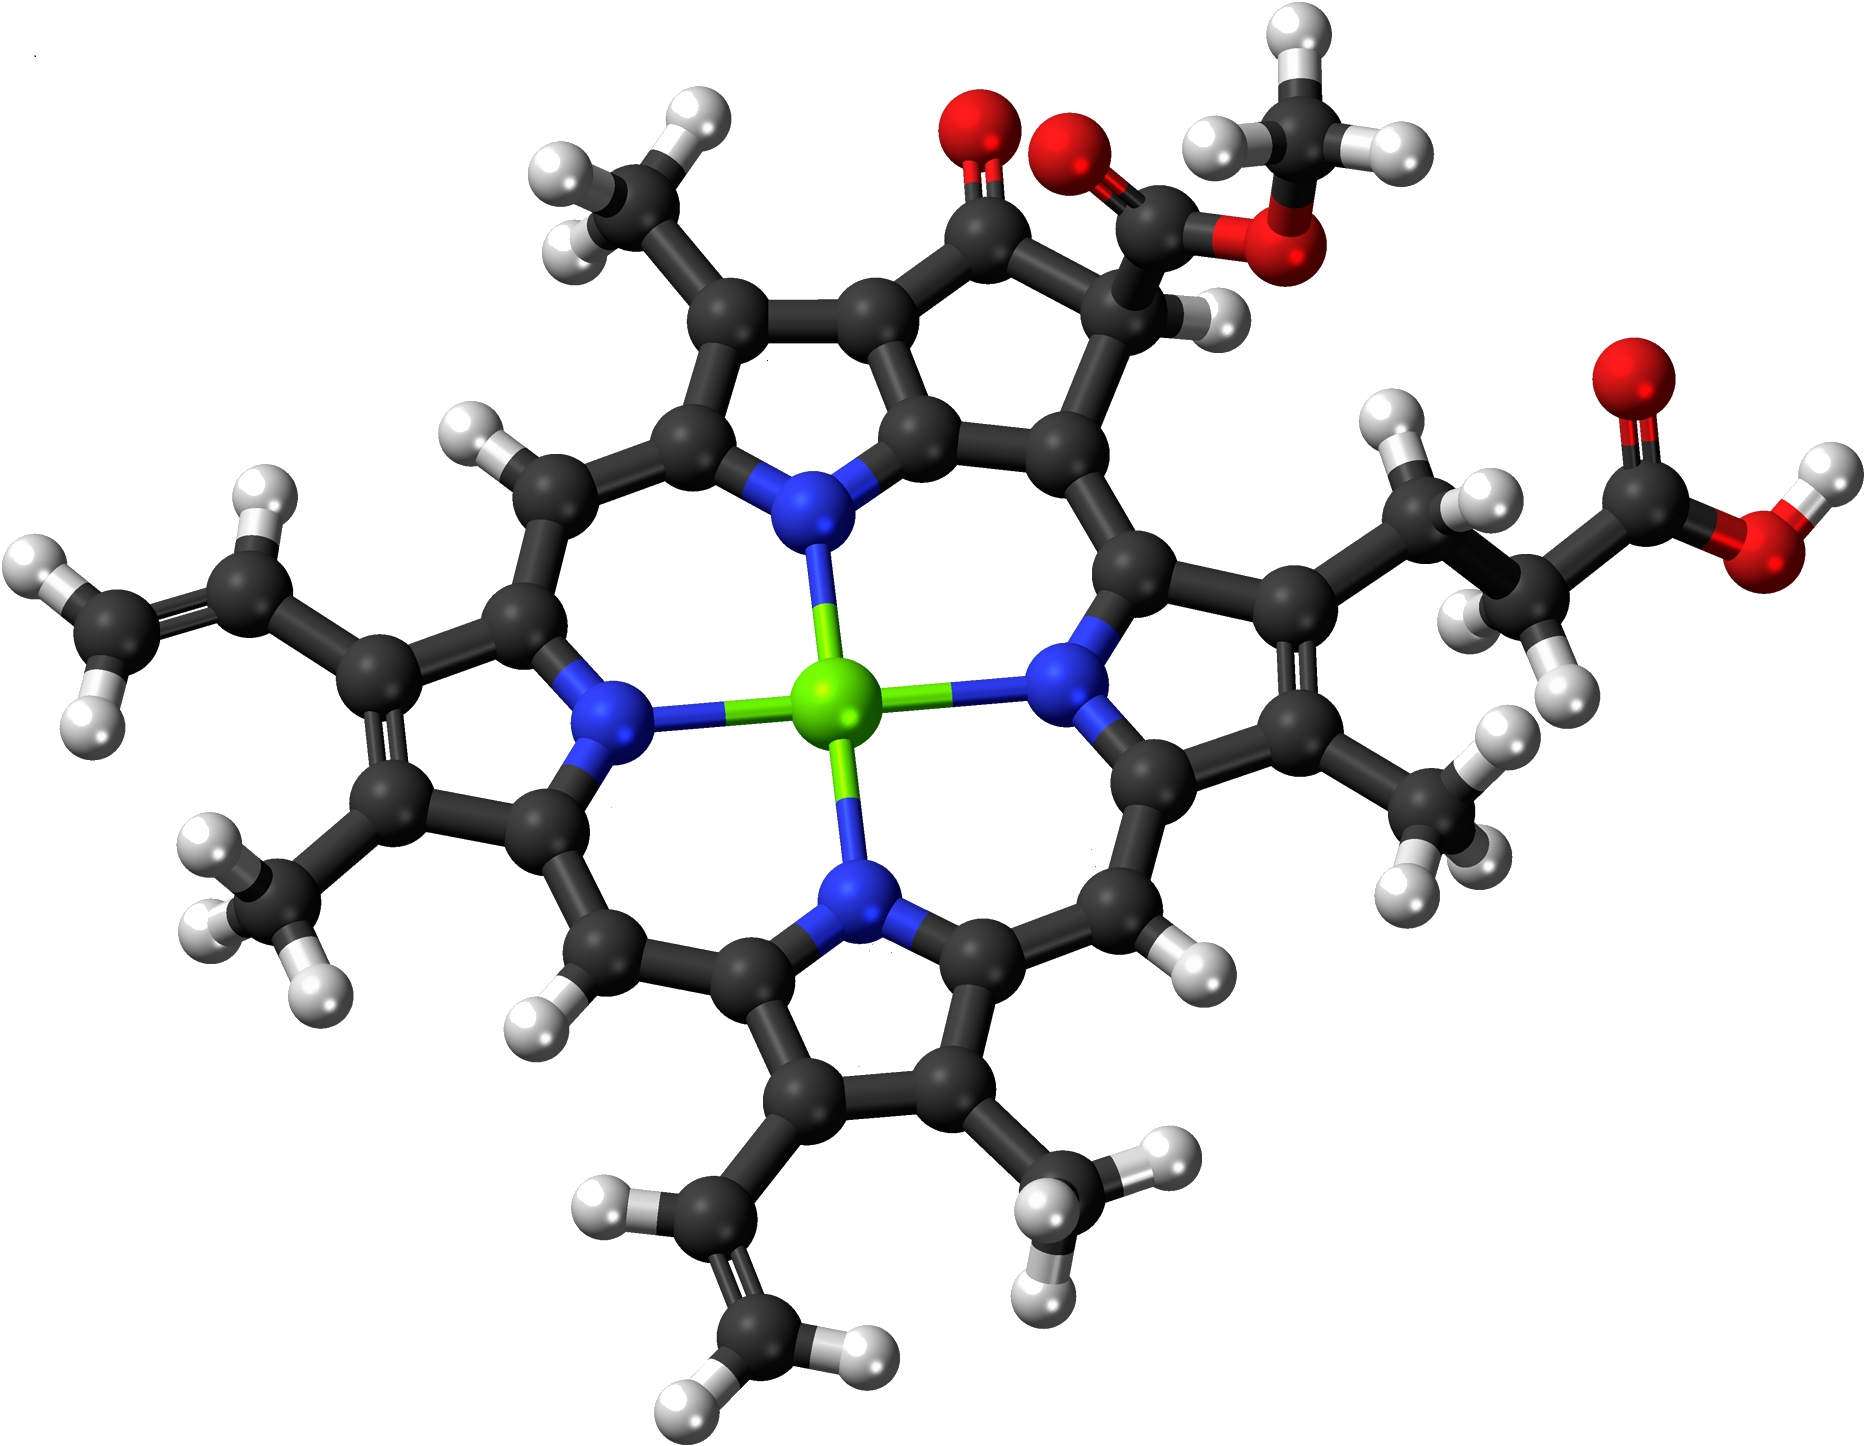  Chlorophyll C2 molecule* - one of nature´s own solutions to generating energy out of greenhouse gases, sunlight, and water. *Plus a CATALYST. 